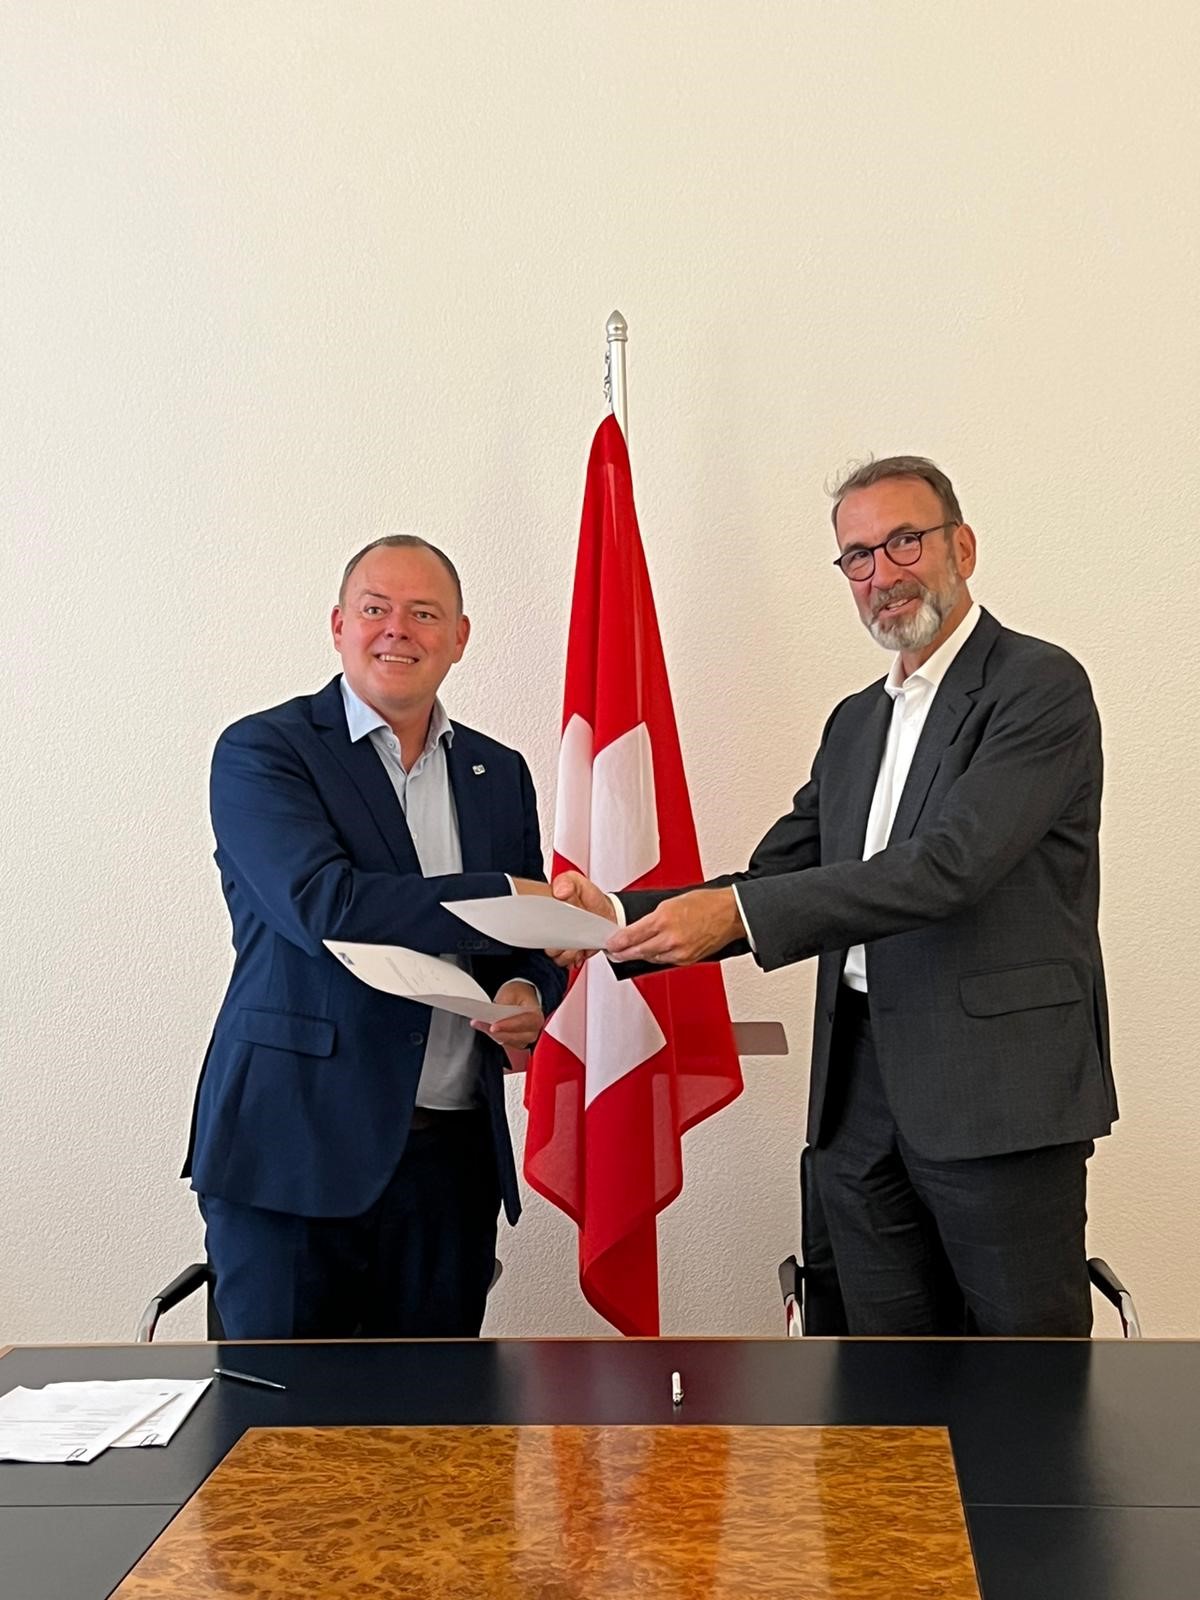 The Swiss State Secretariat renews and expands its contribution to IDI